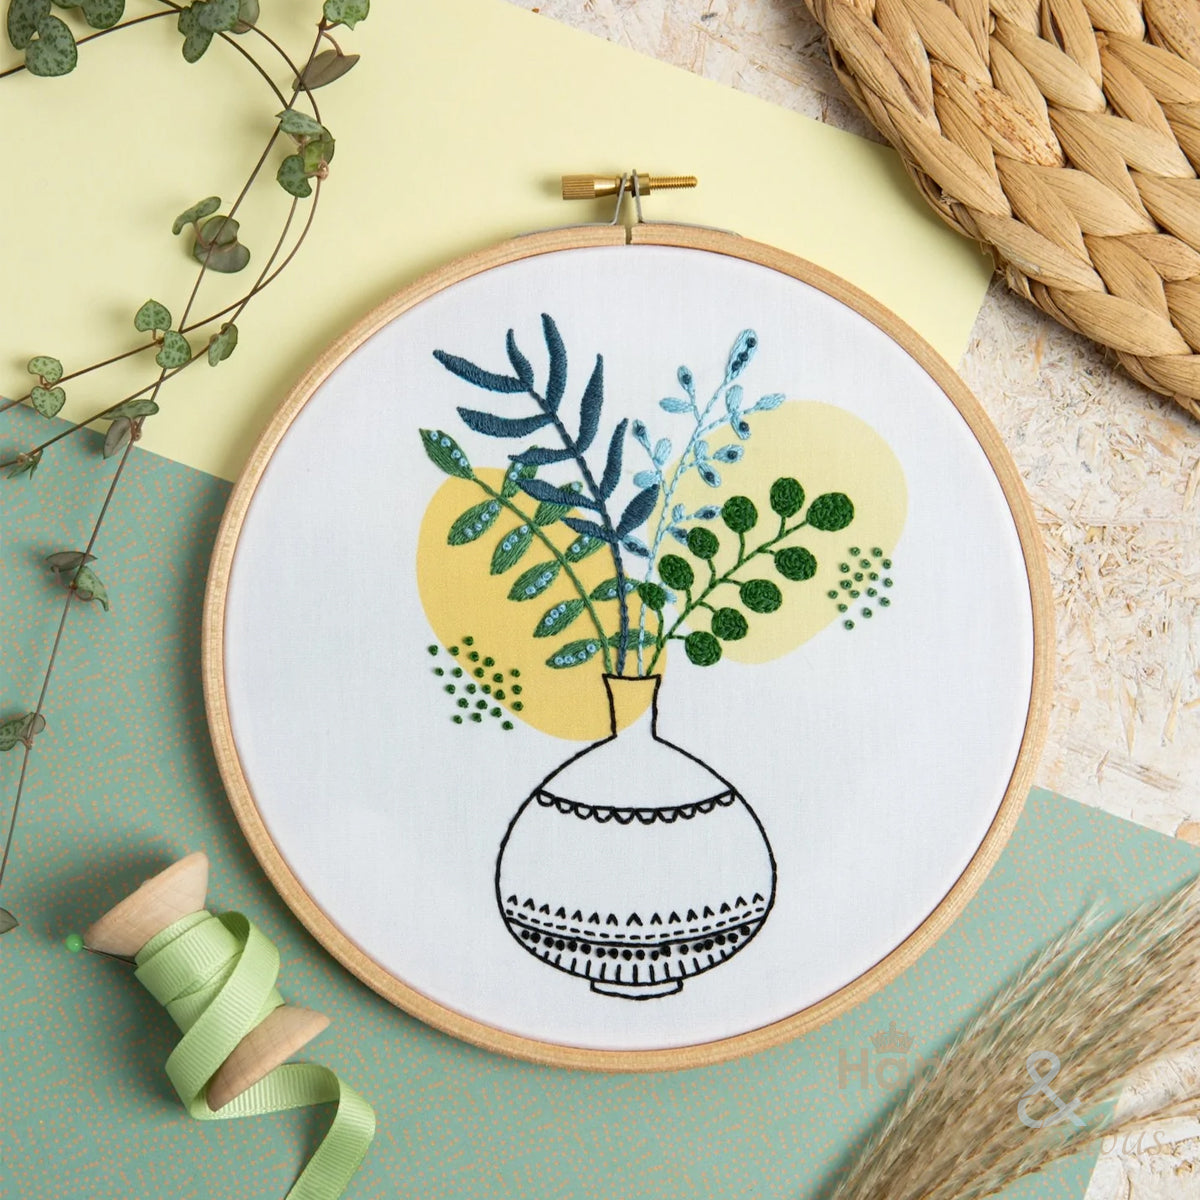 Green fingers contemporary embroidery craft kit